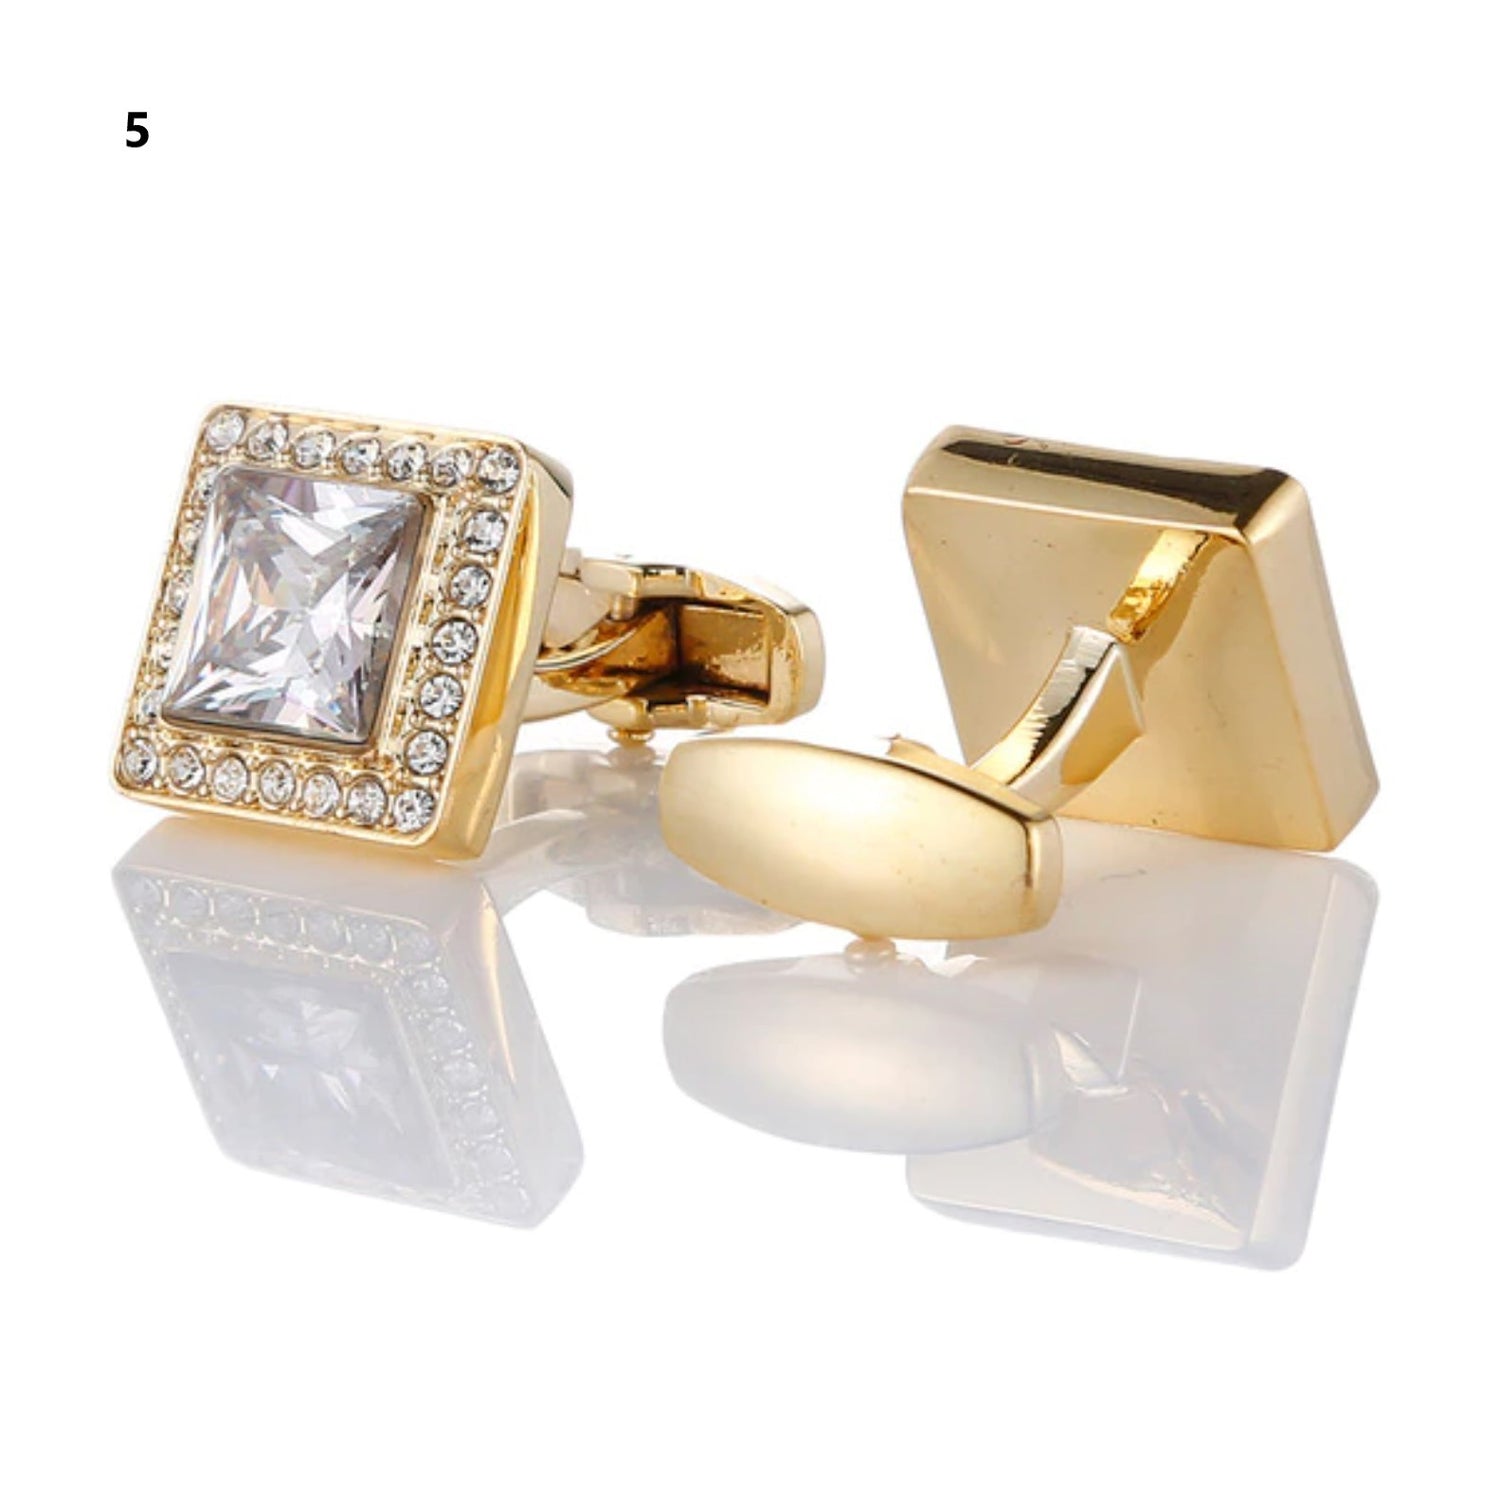 Gold Color Square Cufflinks with Clear Stone